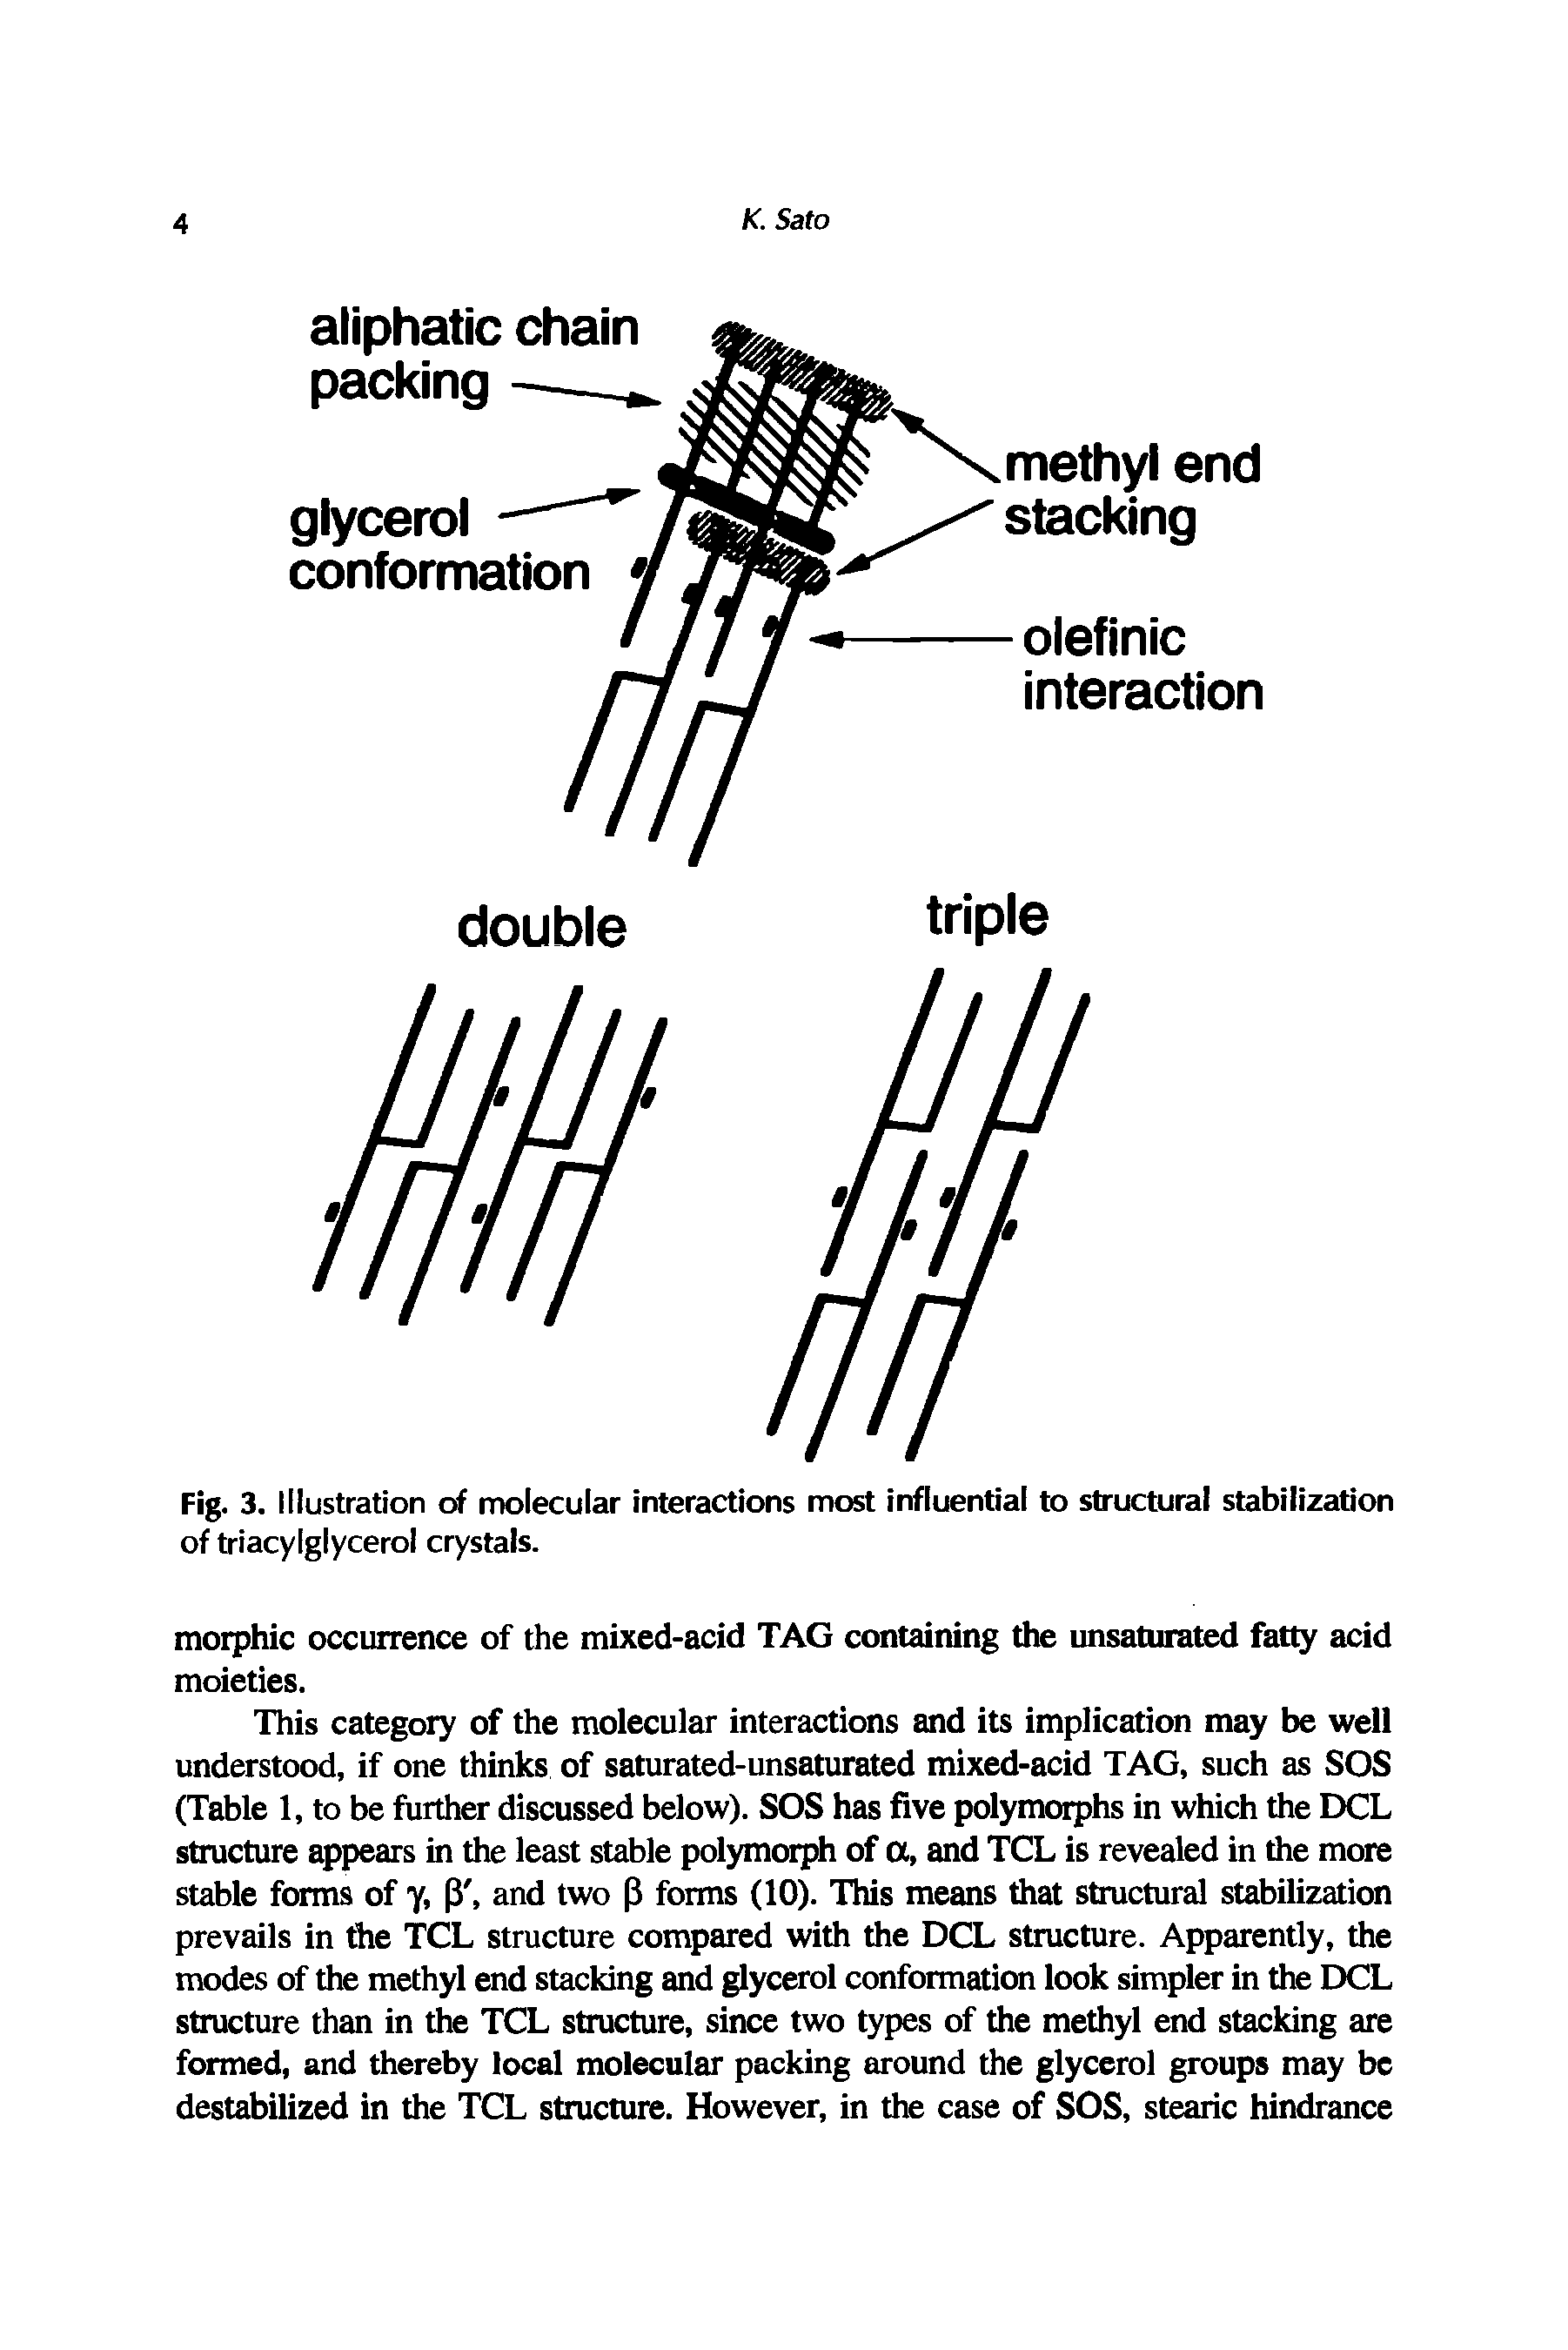 Fig. 3. Illustration of molecular interactions most irrfluential to structural stabilization of triacylglycerol crystals.